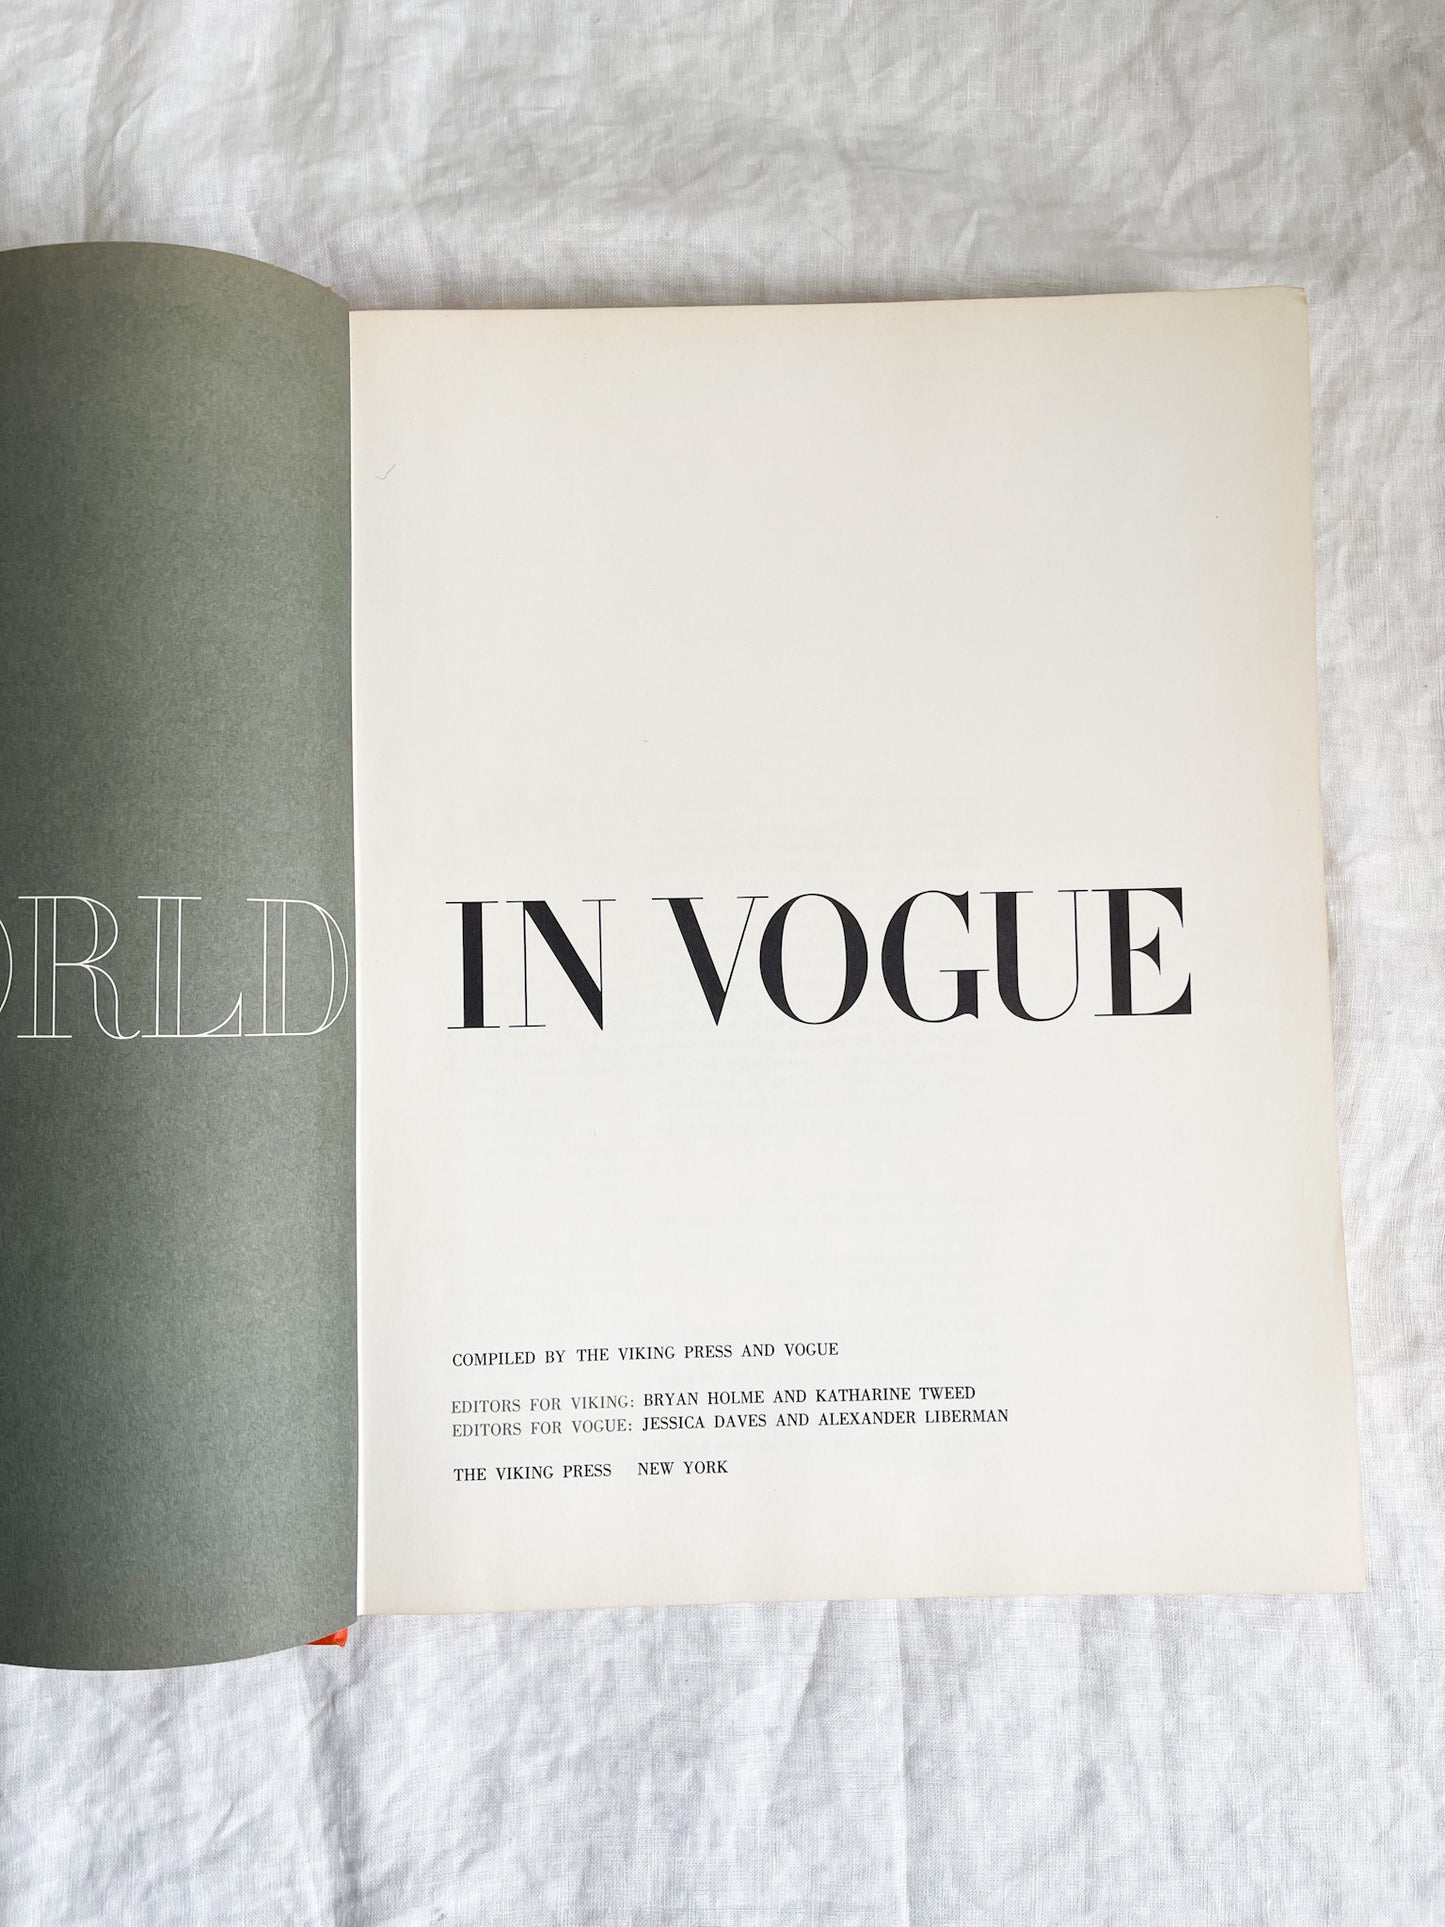 Vintage Book "The World In Vogue"